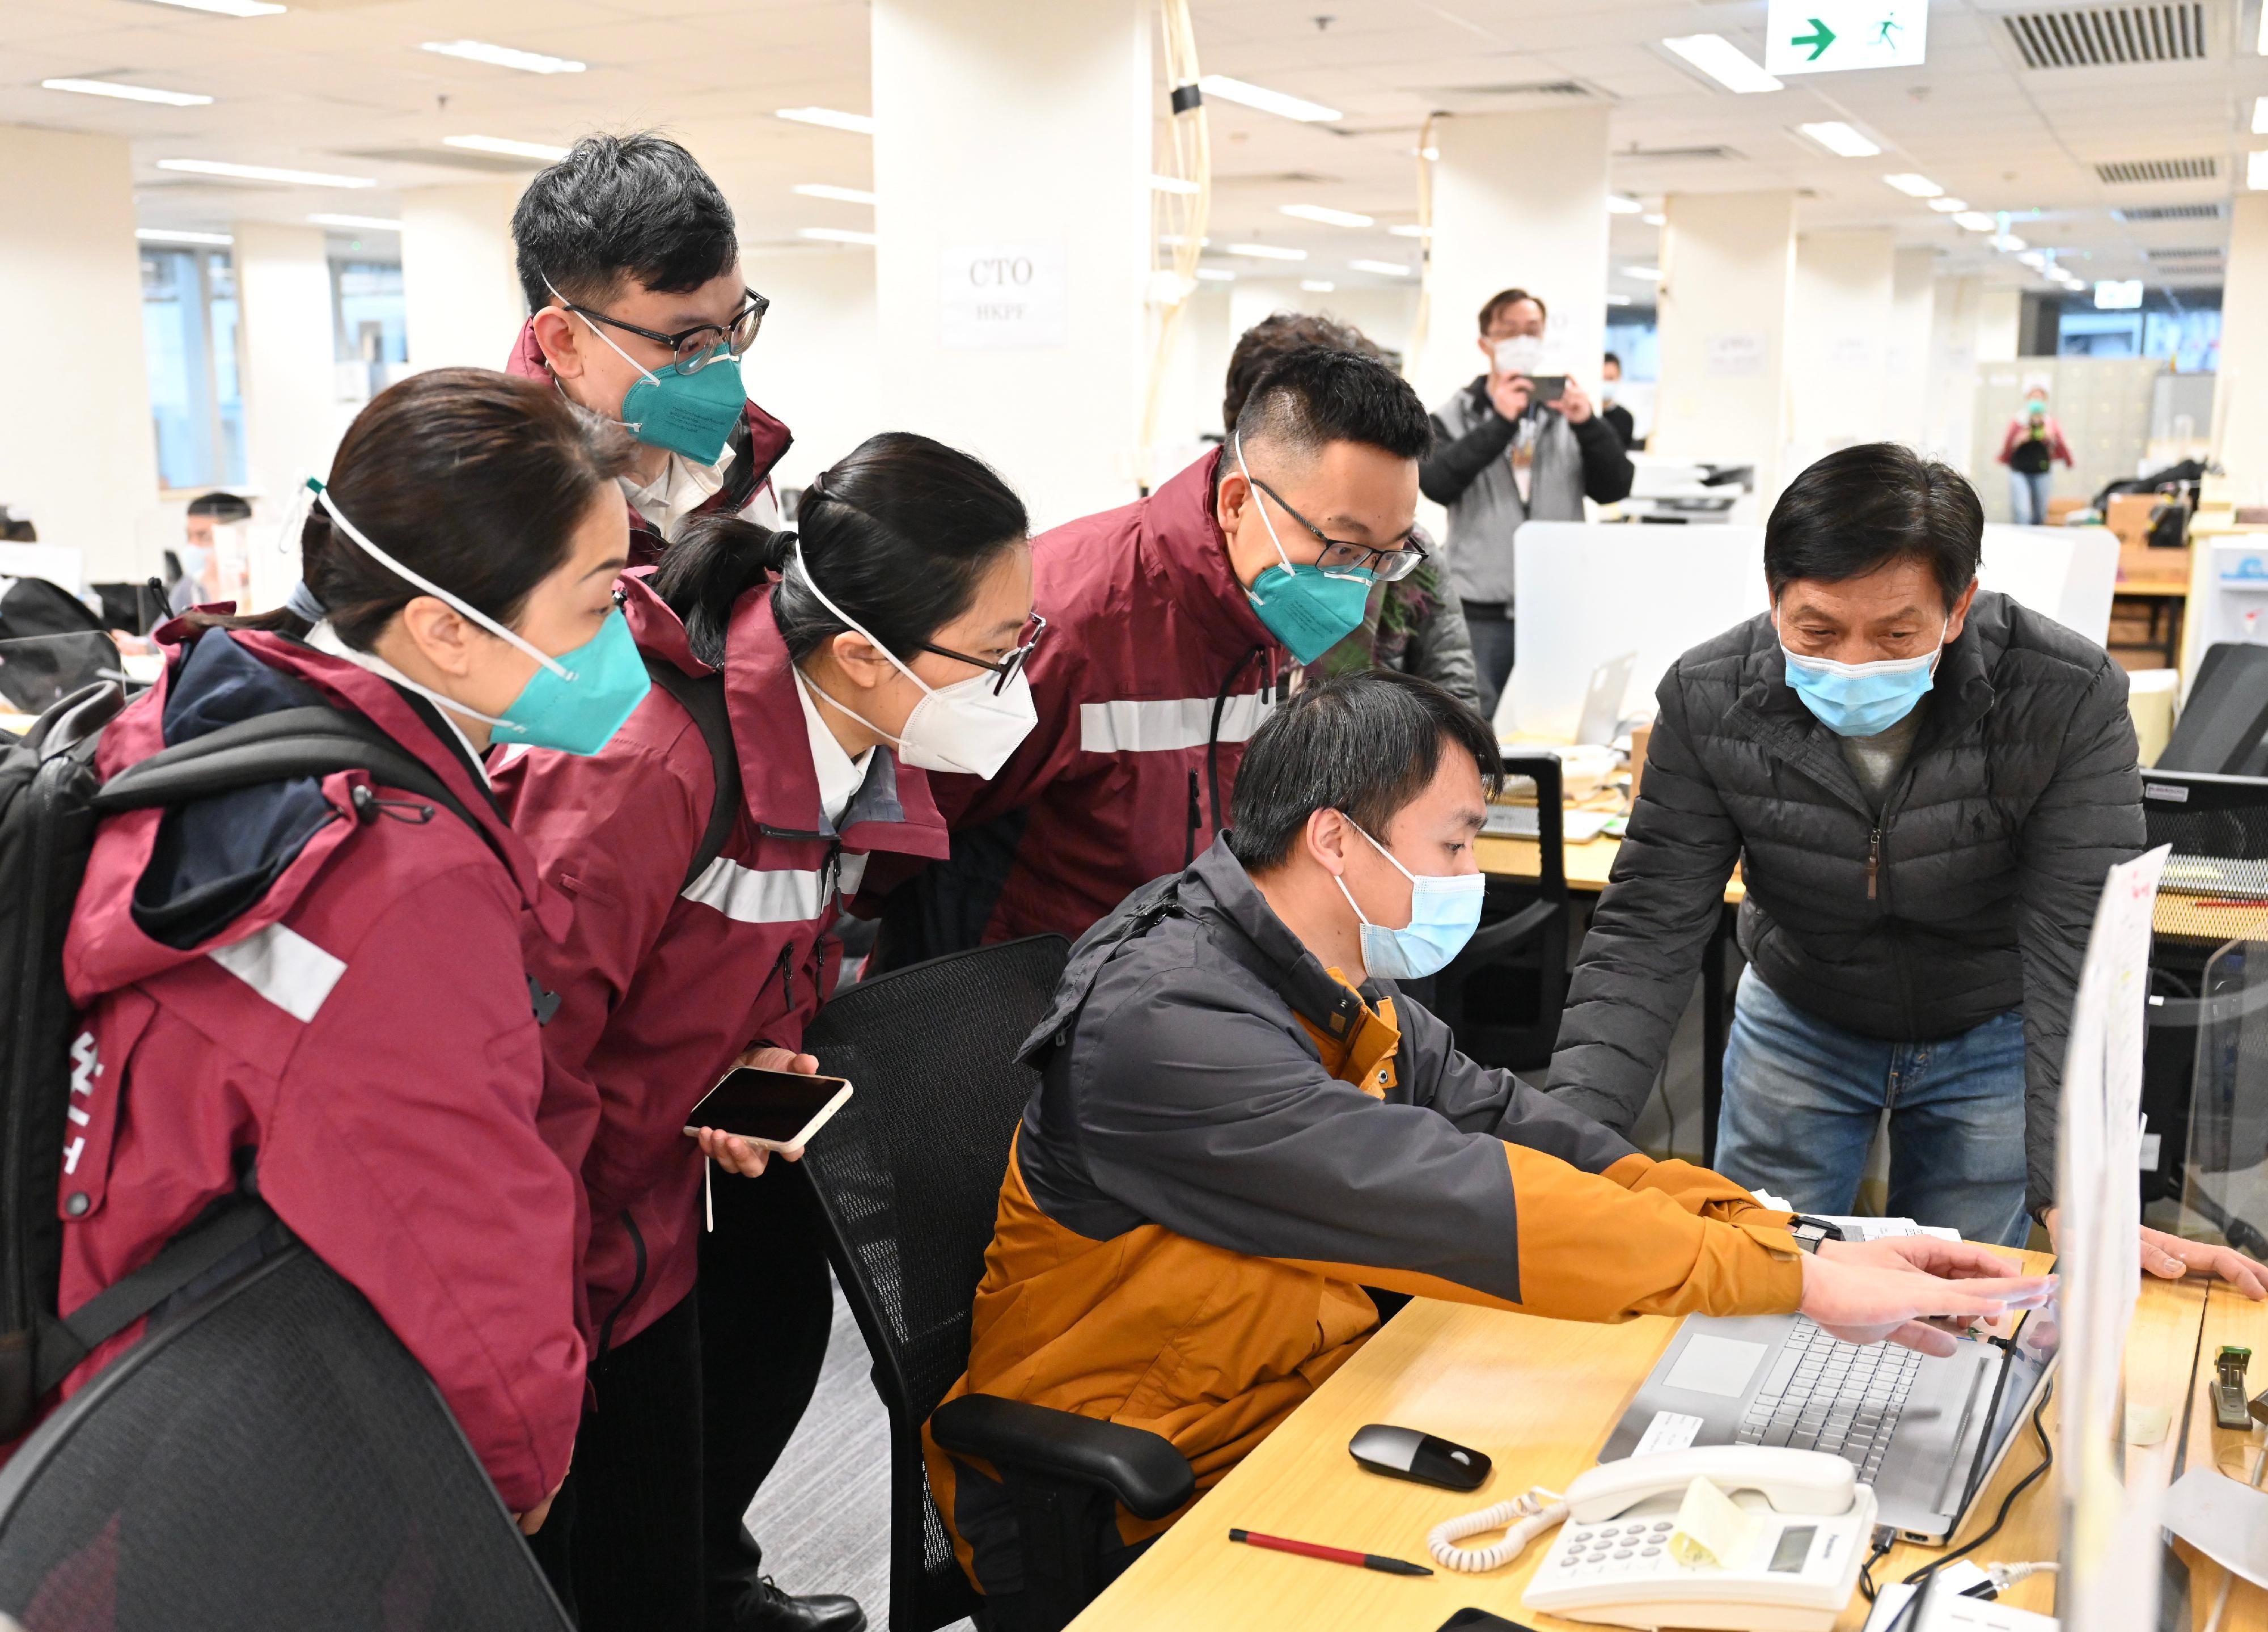 The Mainland epidemiological expert delegation visited the Contact Tracing Office (CTO) under the Communicable Disease Branch of the Centre for Health Protection of the Department of Health in San Po Kong this morning (February 19). Photo shows the Director of Institute of Infectious Disease Control and Prevention of the Guangdong Provincial Center for Disease Control and Prevention, Mr Kang Min (fourth left); senior public health doctor of the Guangzhou Center for Disease Control and Prevention Ms Chen Chun (second left); the Director of Public Health Emergency Management Department of Zhongshan Center for Disease Control and Prevention, Ms Chen Xueqin (first left); and General Office clerk of the Guangdong Provincial Center for Disease Control and Prevention Mr Yang Taohui (third left) receiving a briefing by the staff of CTO on the work of the CTO.